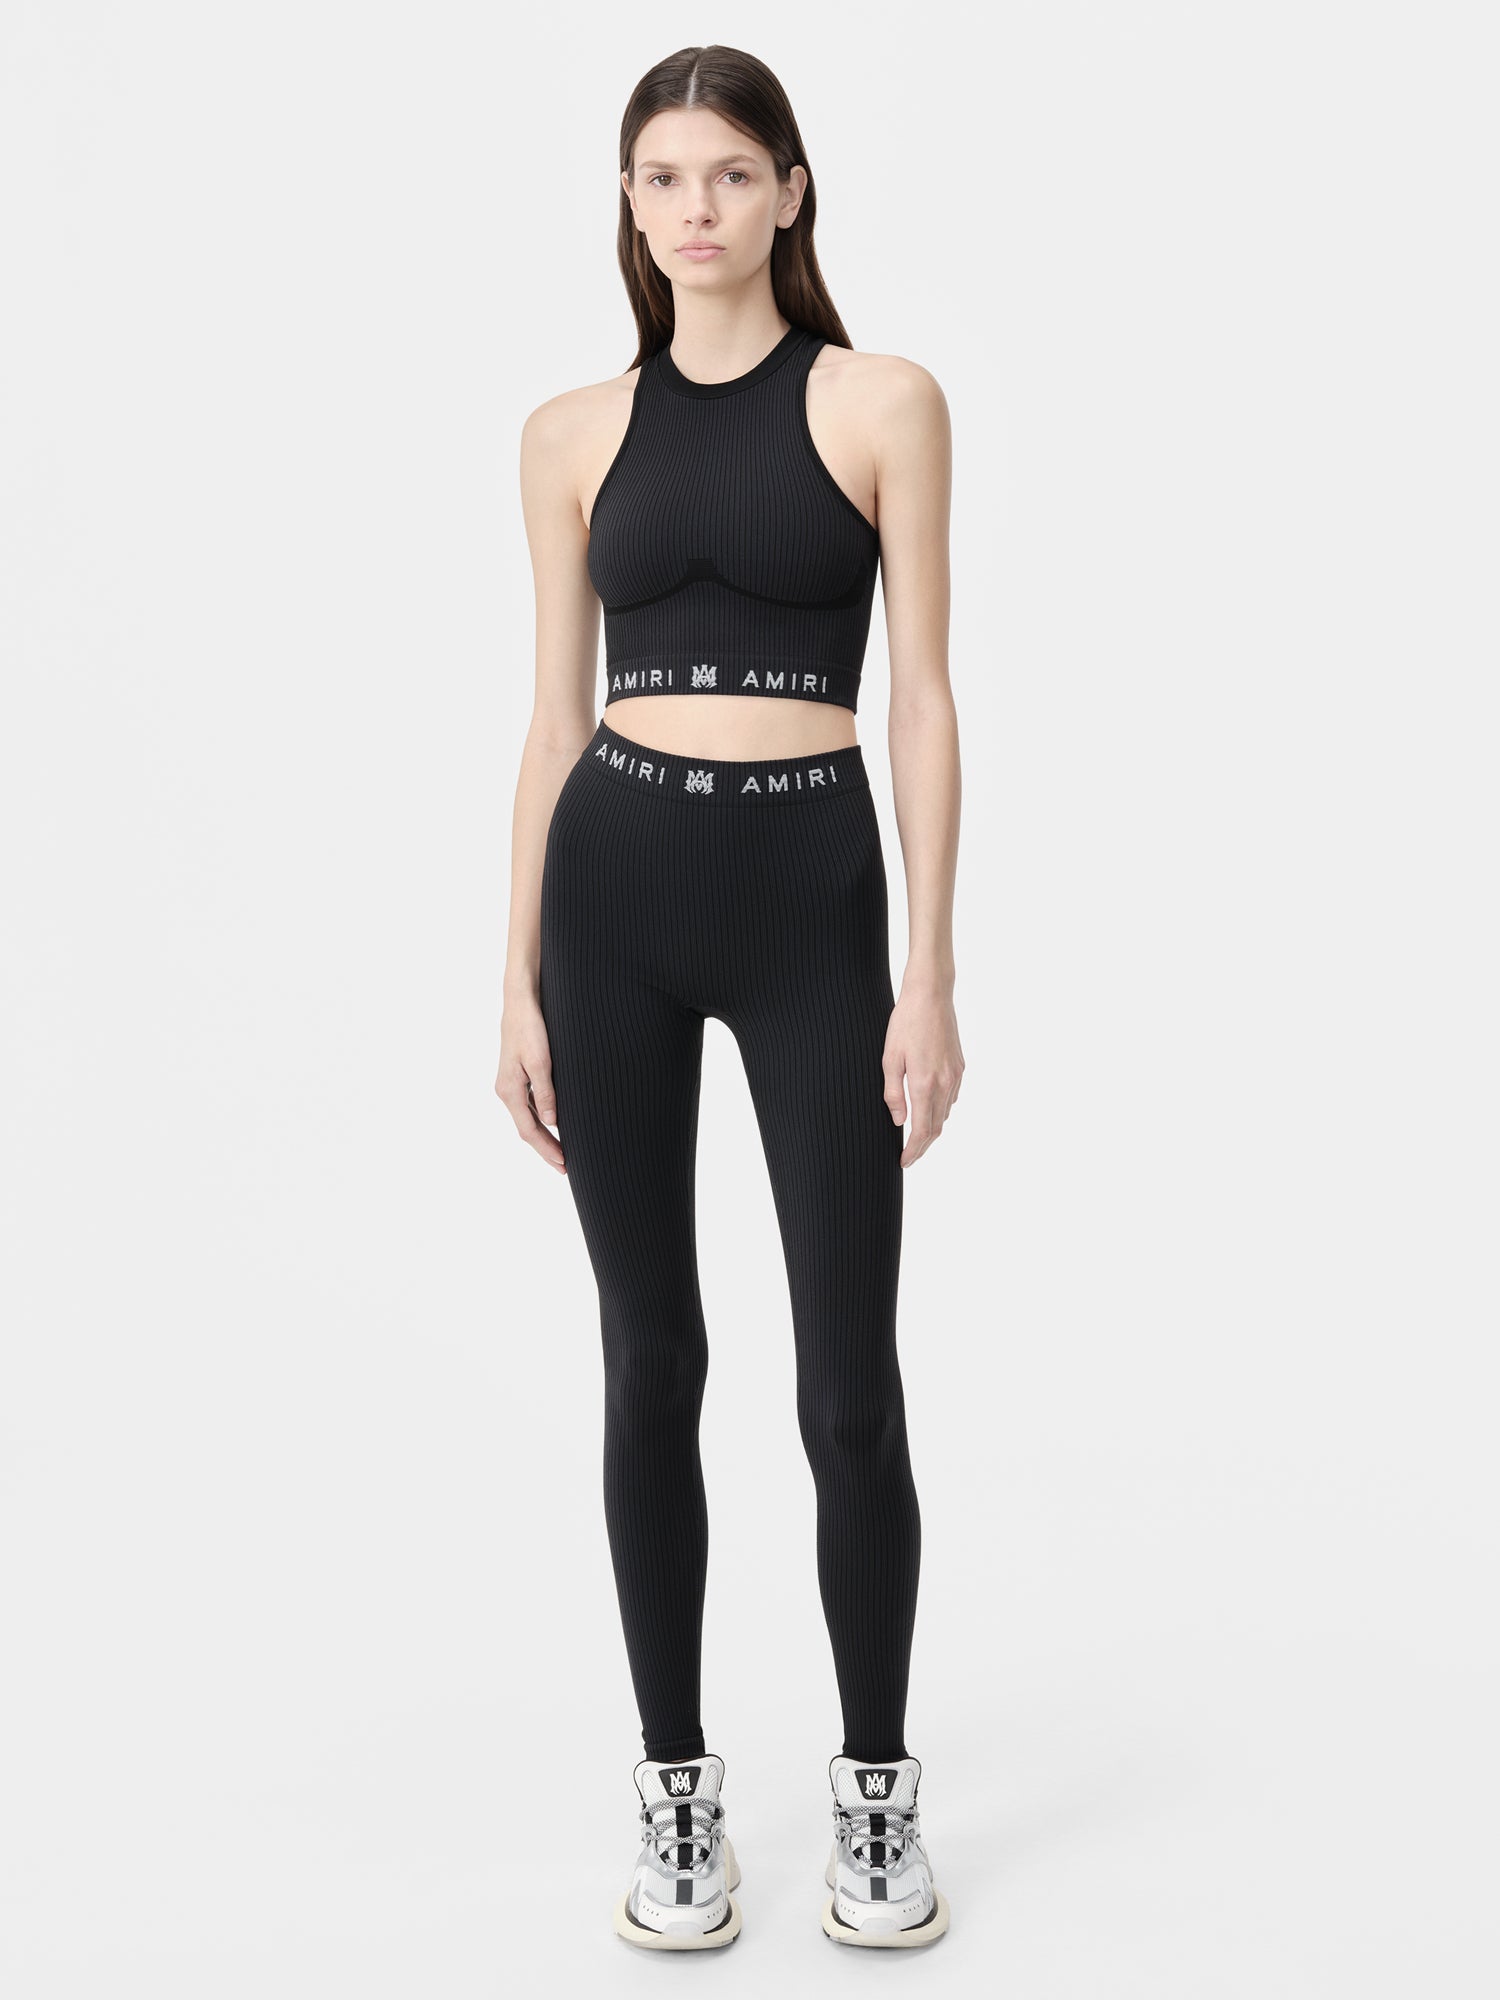 Product WOMEN - WOMEN'S MA RIBBED SEAMLESS LEGGING - Black featured image